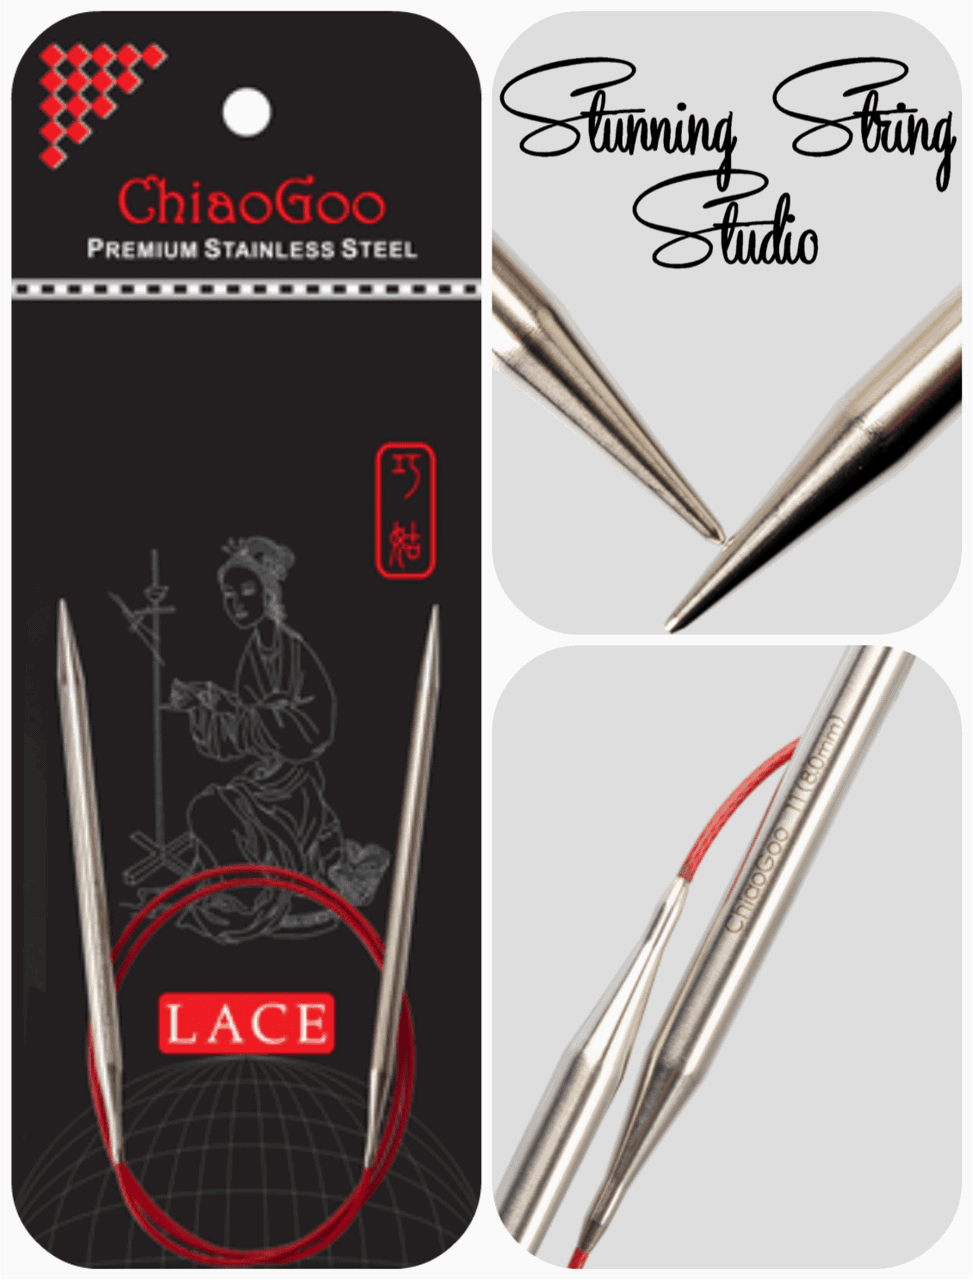 Chiaogoo Red Lace Stainless Circular Knitting Needles 32-size 7